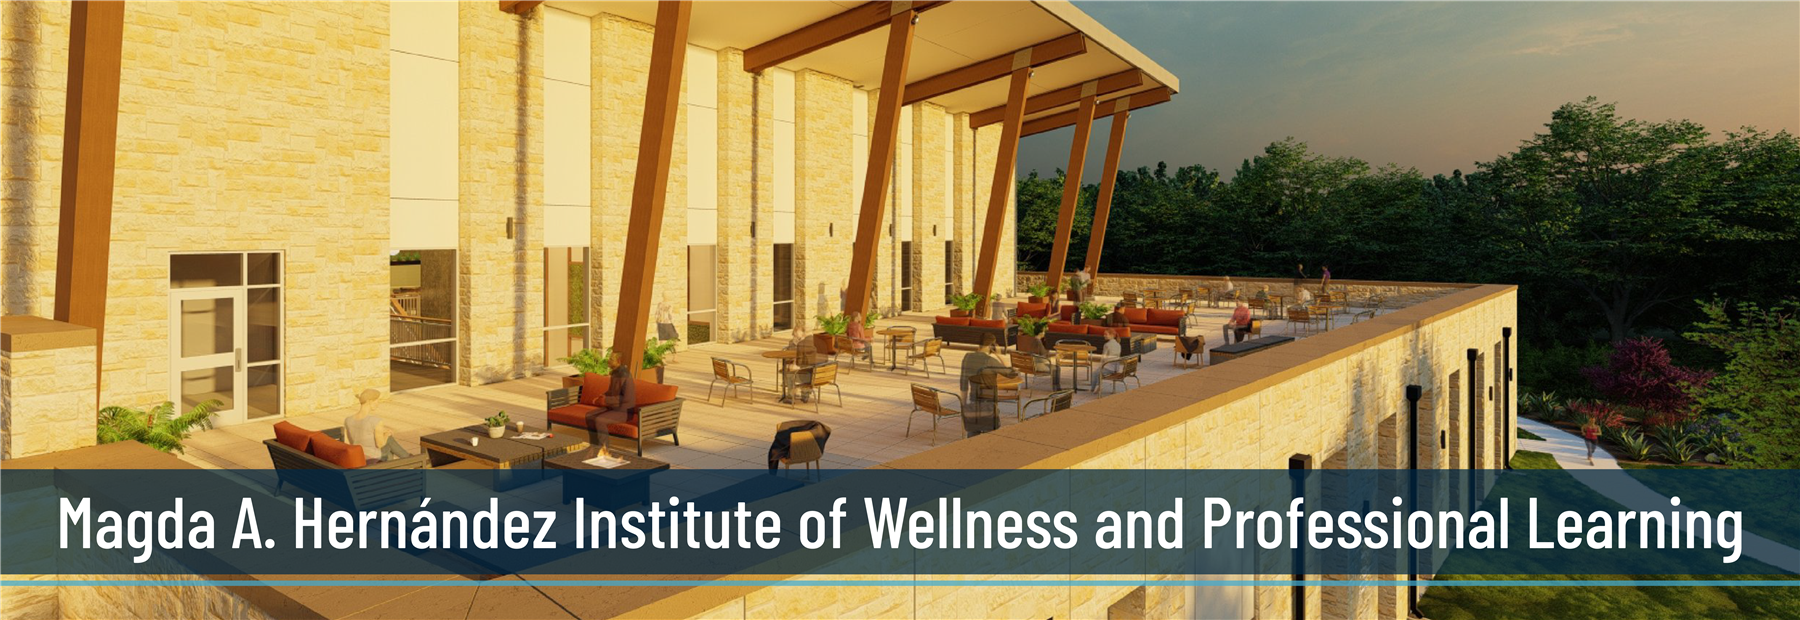 Magda A. Hernandez Institute of Wellness and Professional Learning